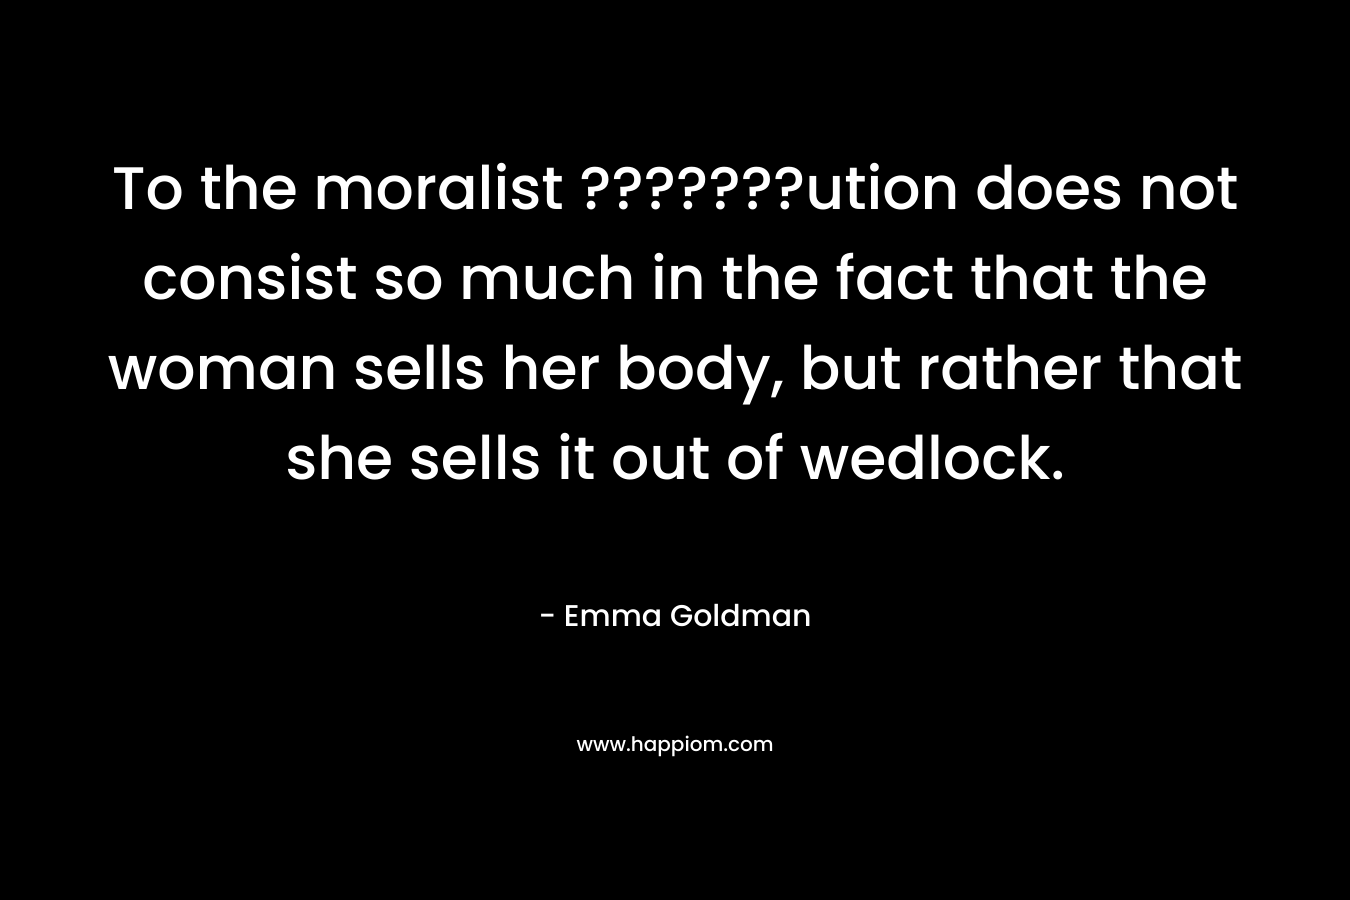 To the moralist ???????ution does not consist so much in the fact that the woman sells her body, but rather that she sells it out of wedlock.